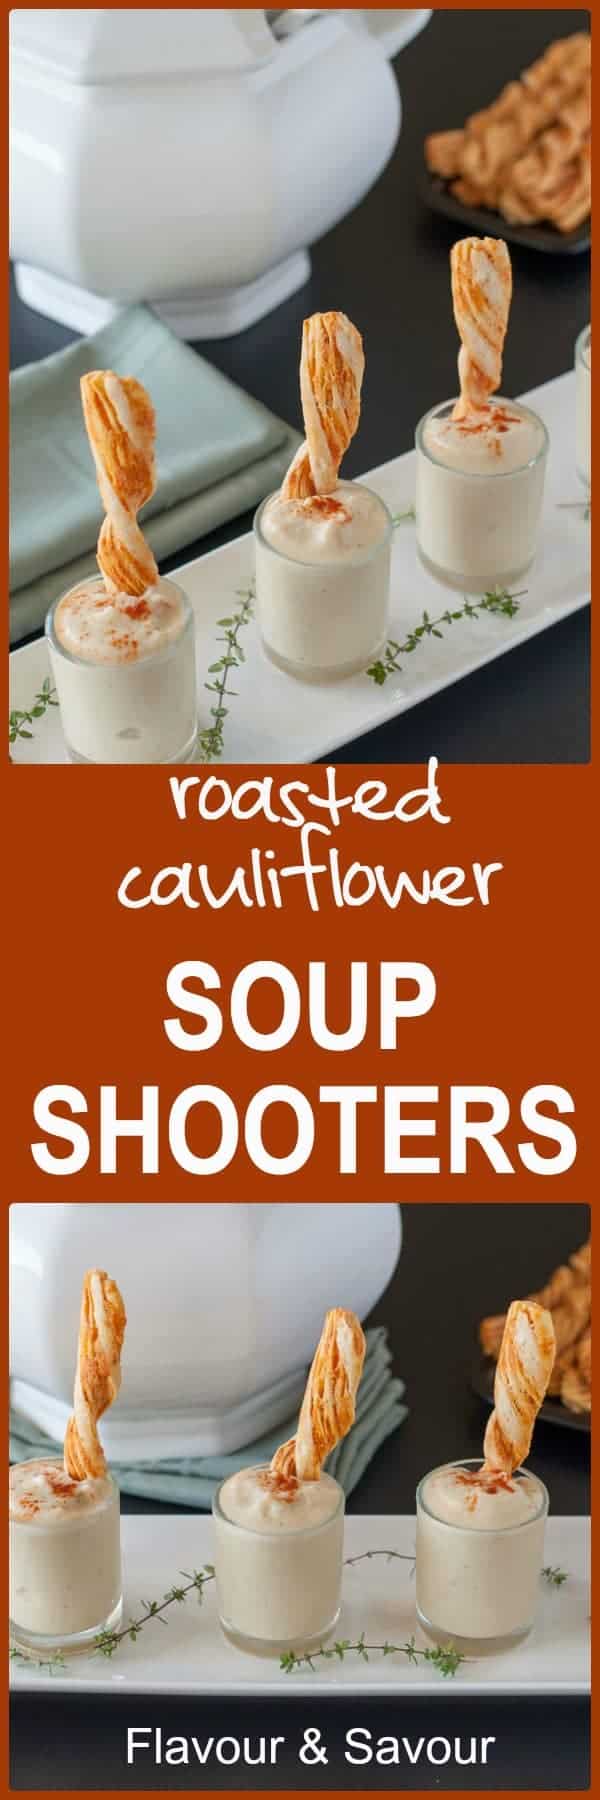 Roasted Cauliflower Soup Shooters, Have fun with your food! Perfect for holiday parties. Creamy cauliflower without the cream. |www.flavourandsavour.com